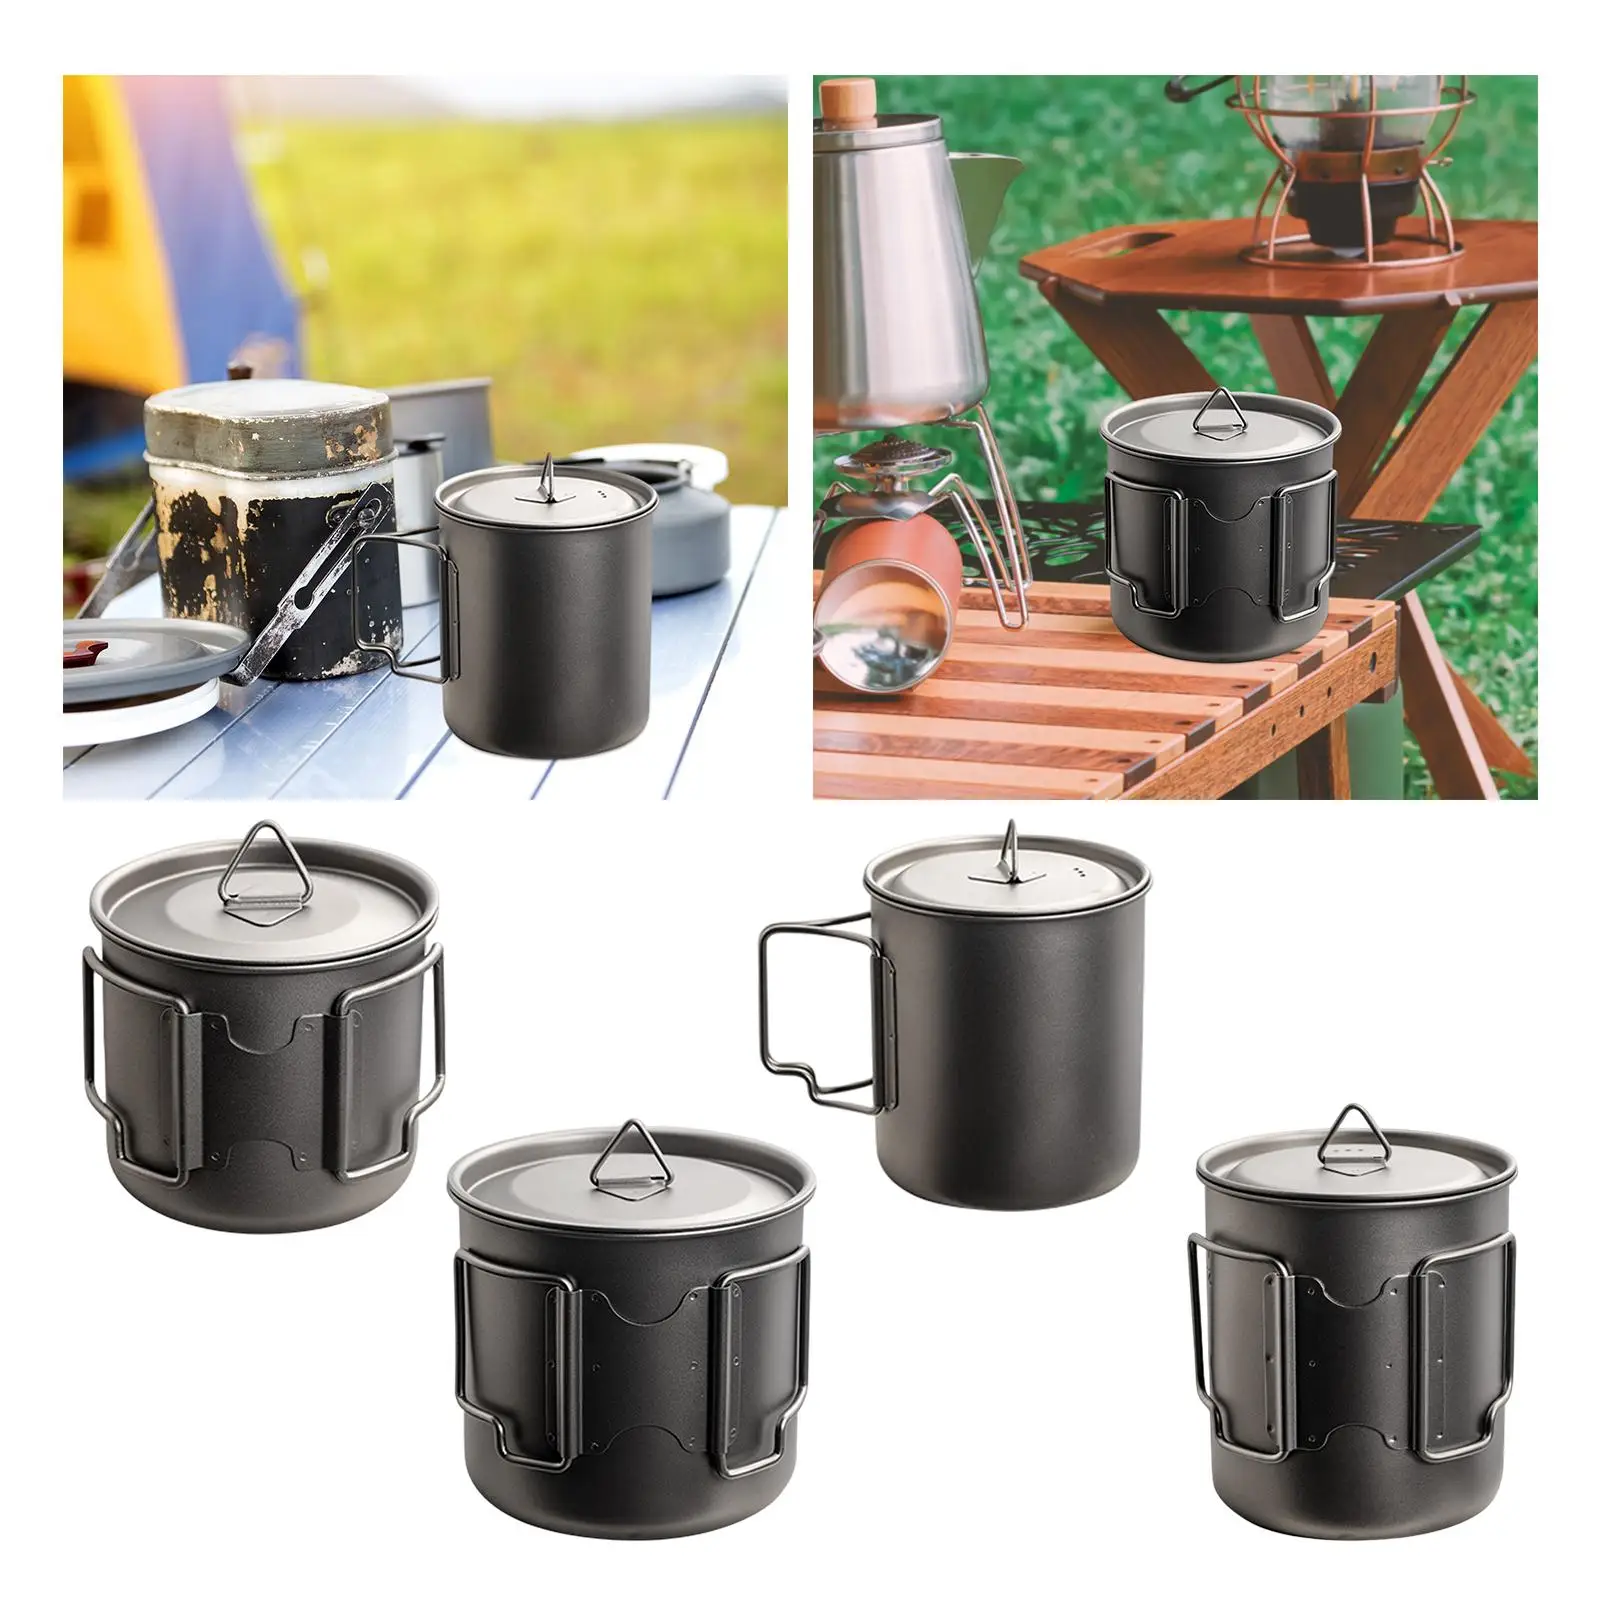 Titanium Pot Backpacking with Foldable Handle Water Tableware Camping Tea Coffee Mug for Indoor Outdoor Cooking Climbing Travel